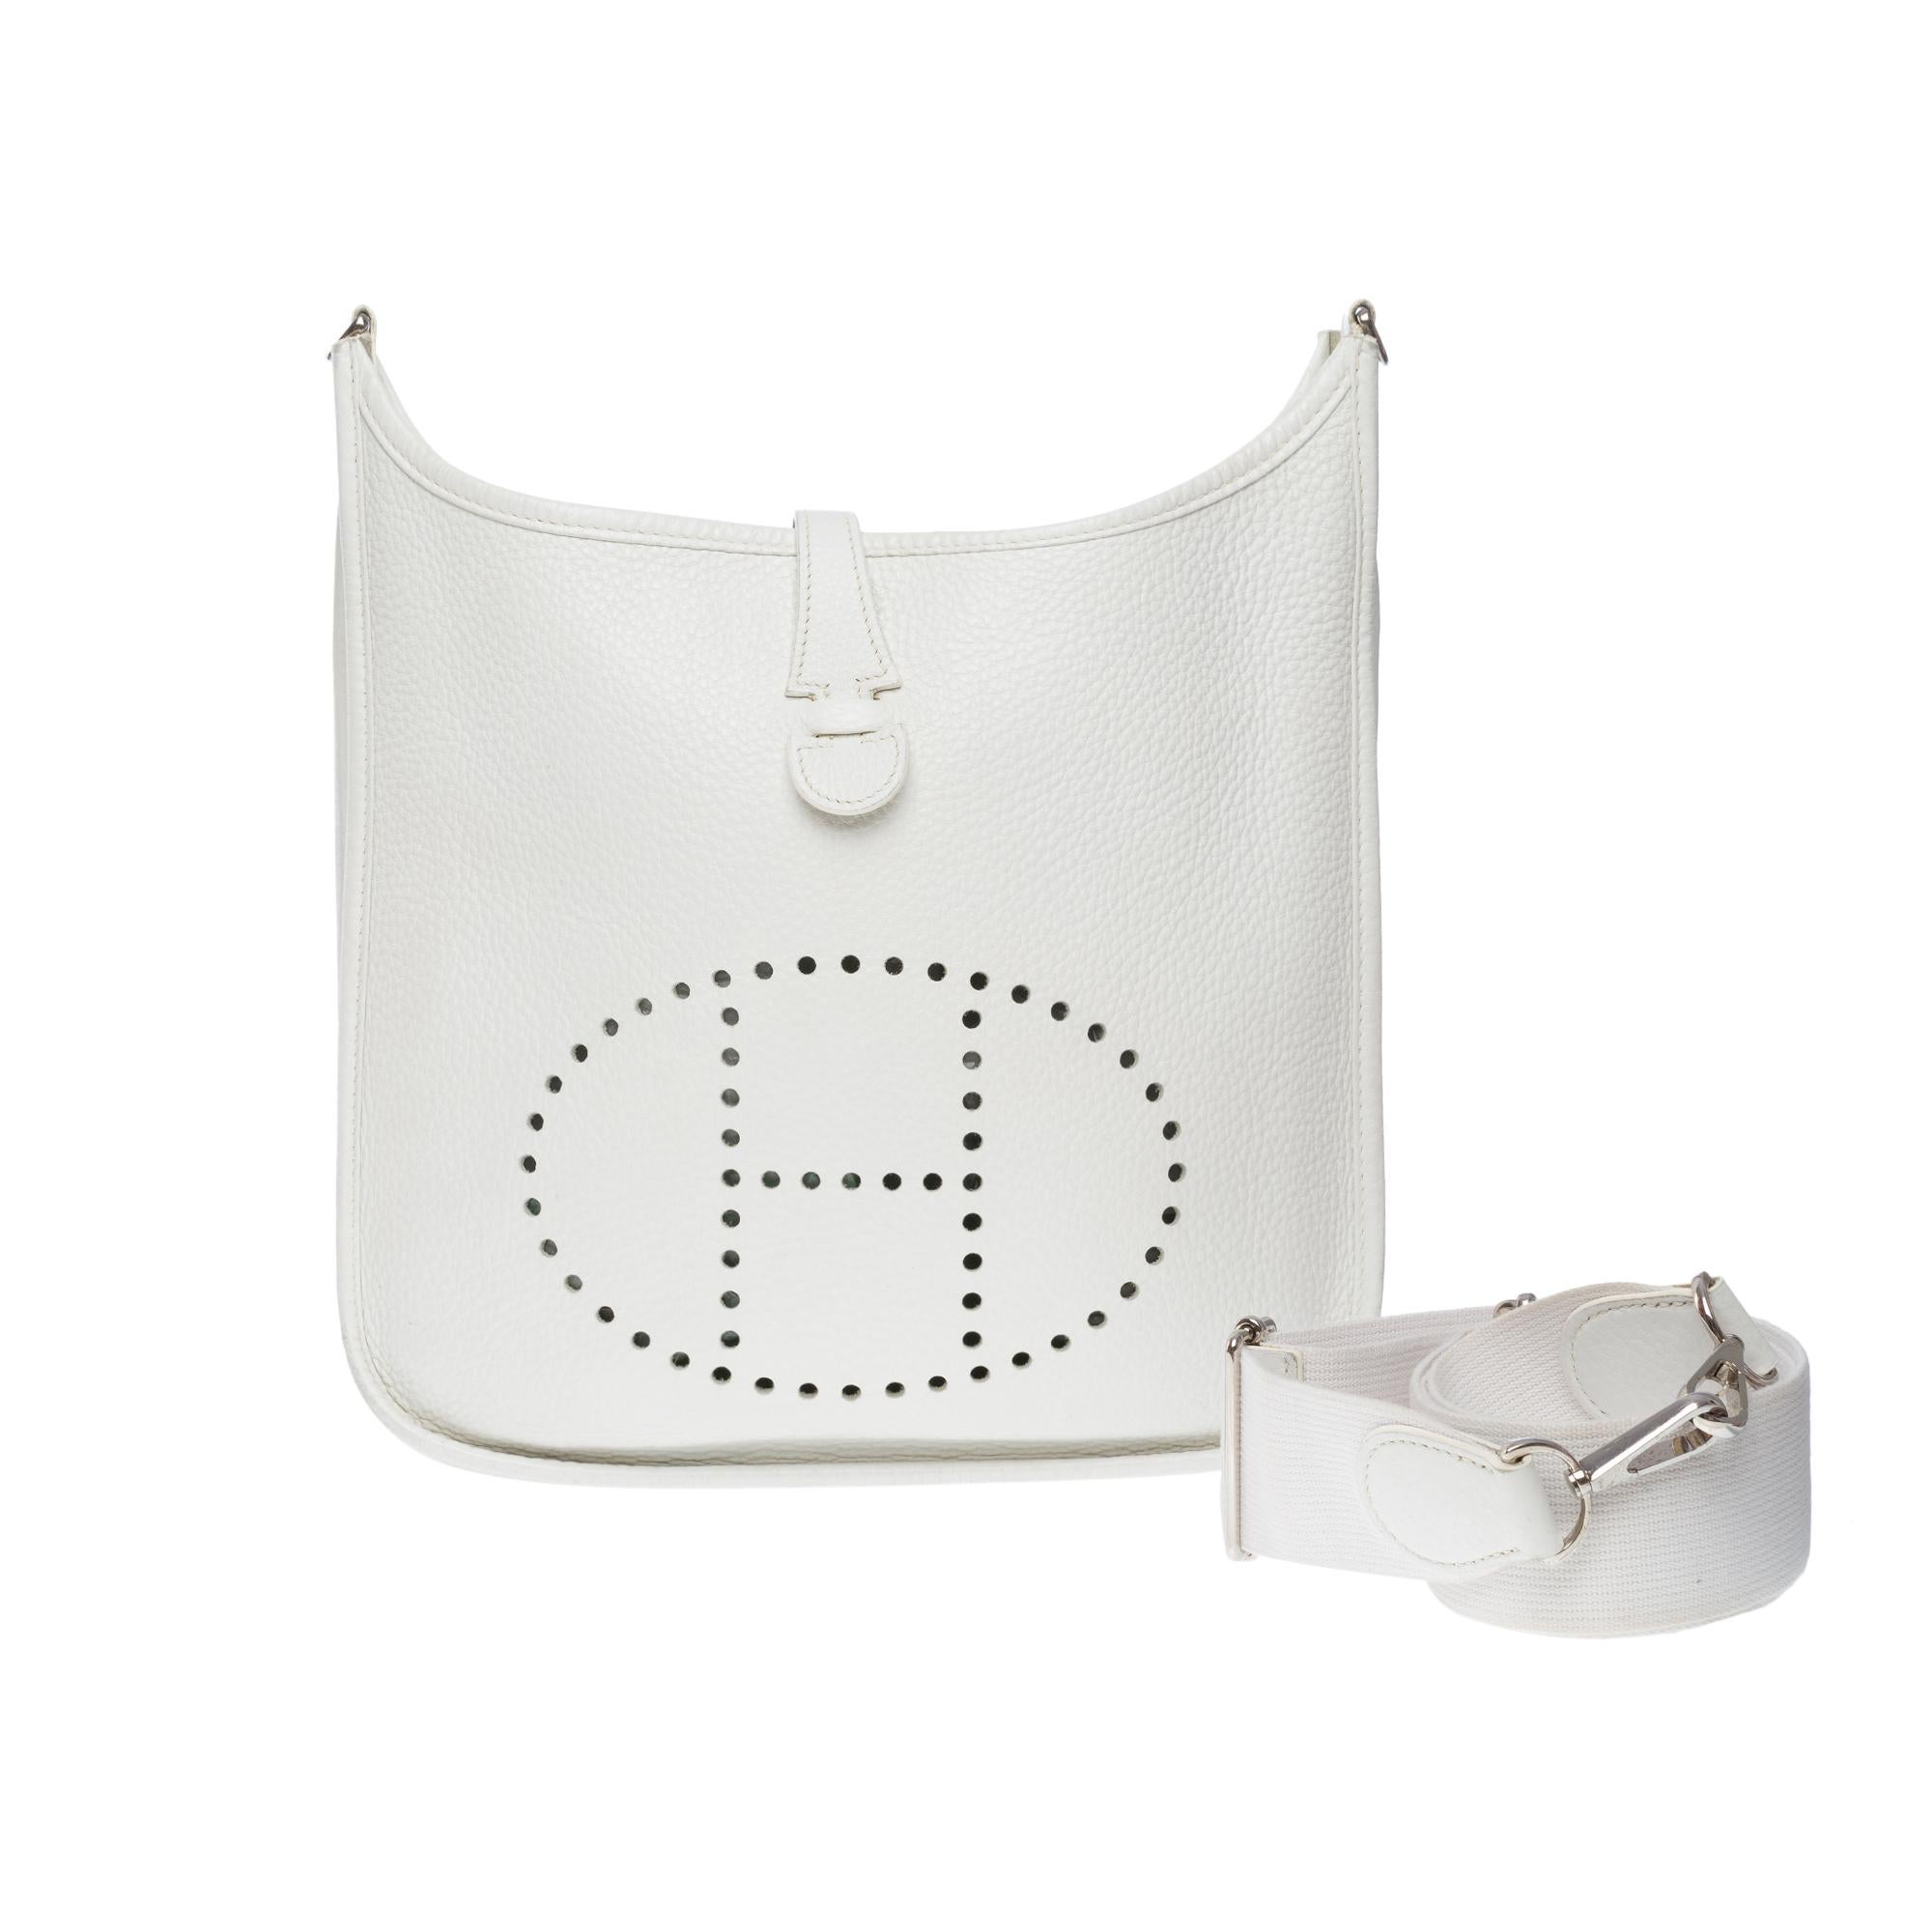 The Iconic Hermes Evelyne 29 shoulder bag in White Taurillon Clémence leather, silver metal hardware, a removable shoulder strap in white canvas for a shoulder or crossbody carry

Snap closure on flap
Back patch pocket
White suede